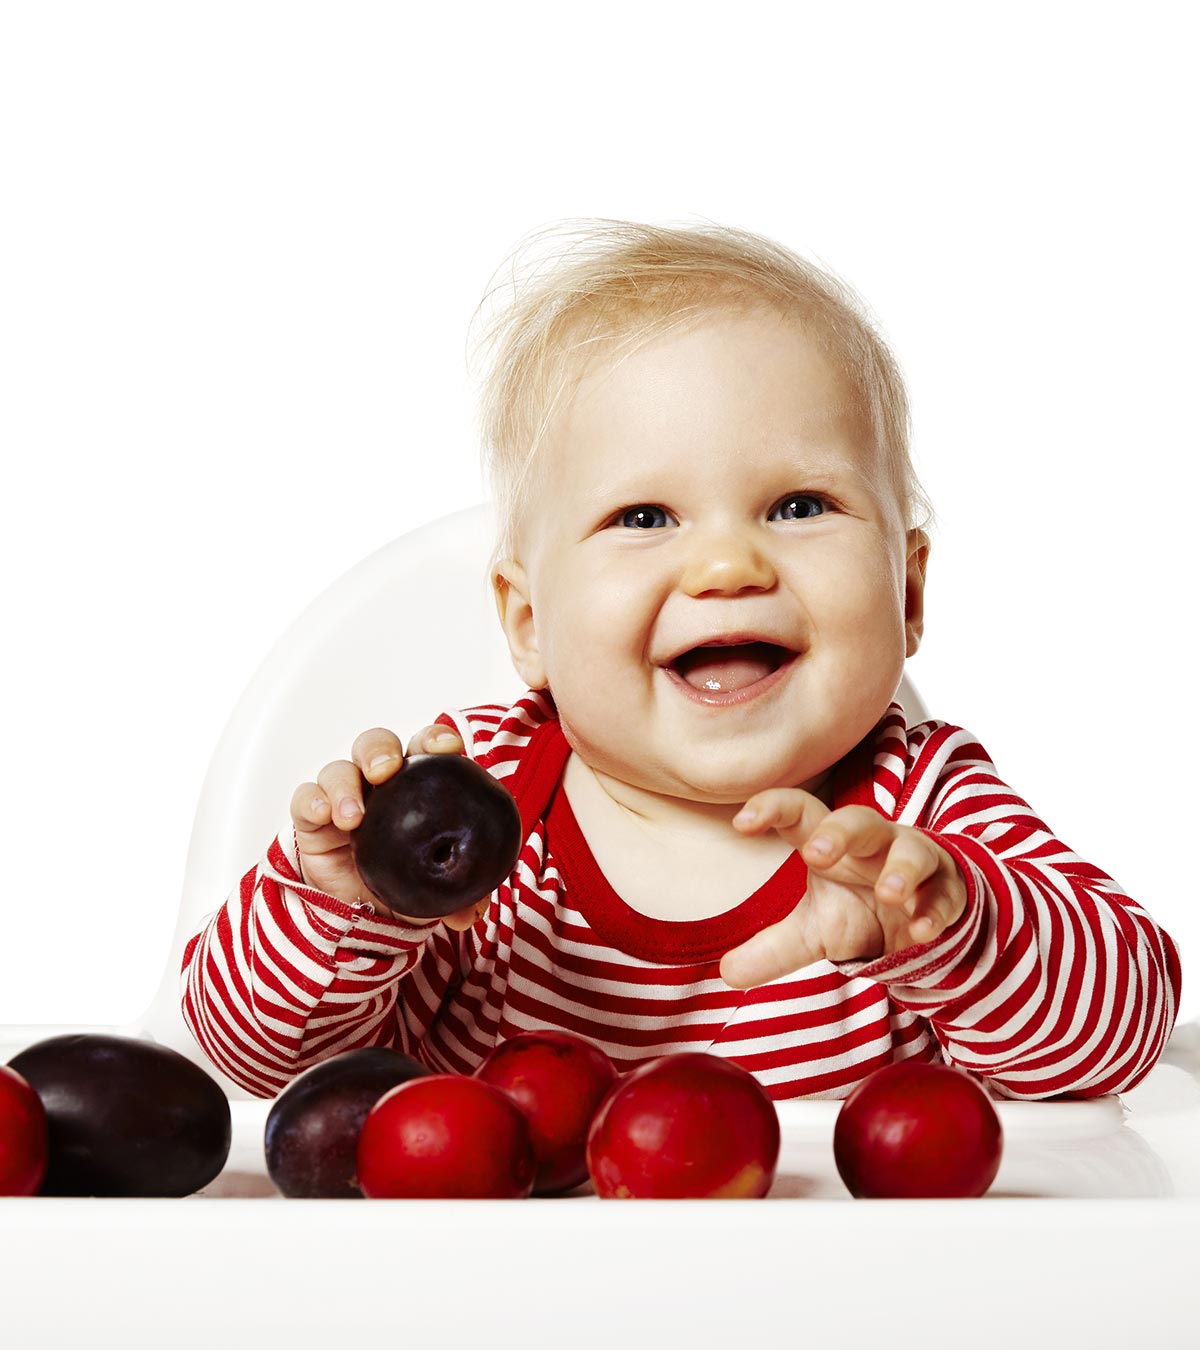 10 Delicious Plum Recipes For Your Baby